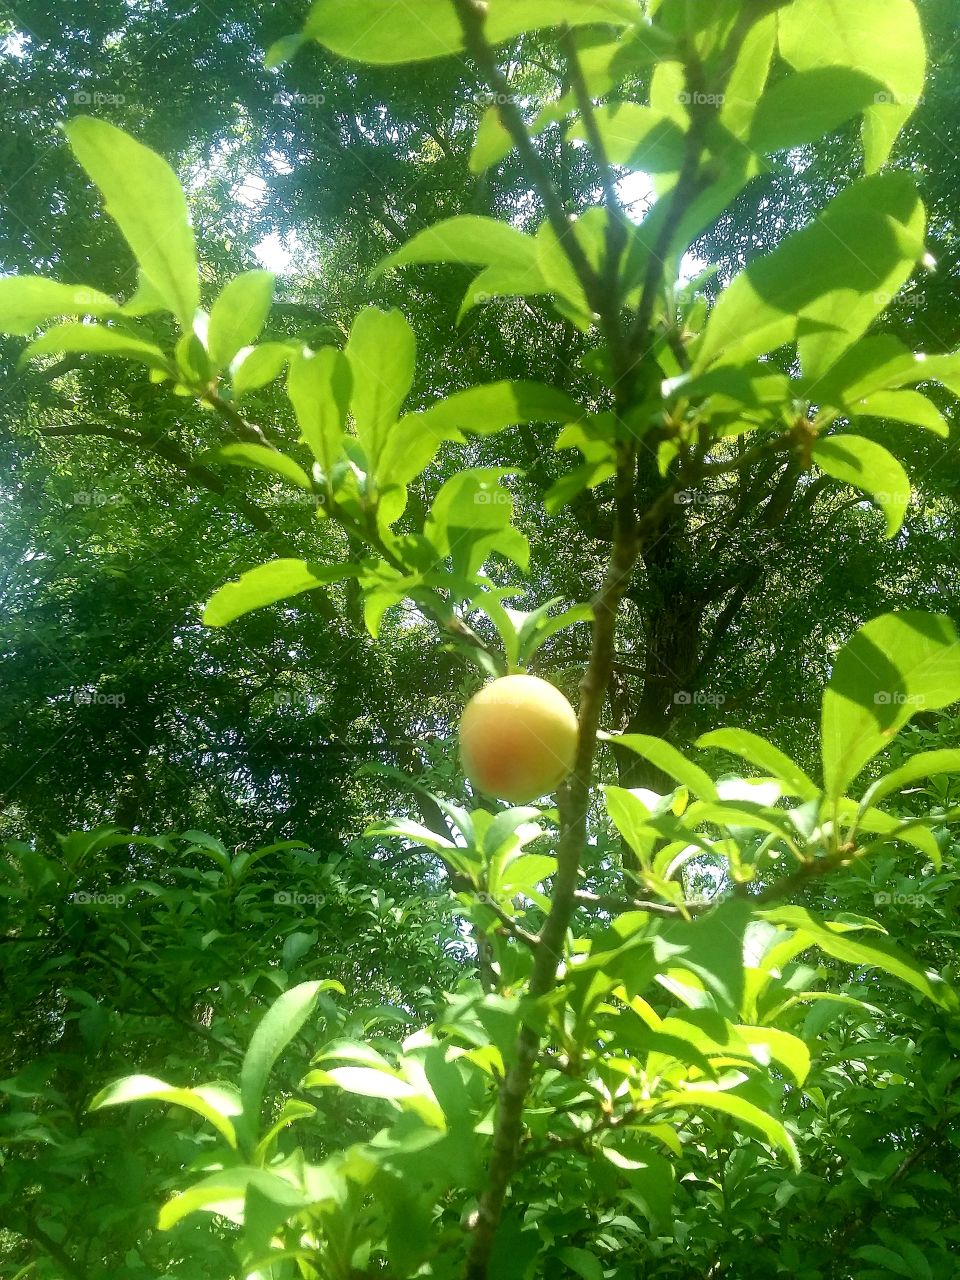 Dwarf Plums are popping! Squirrels stay away...please